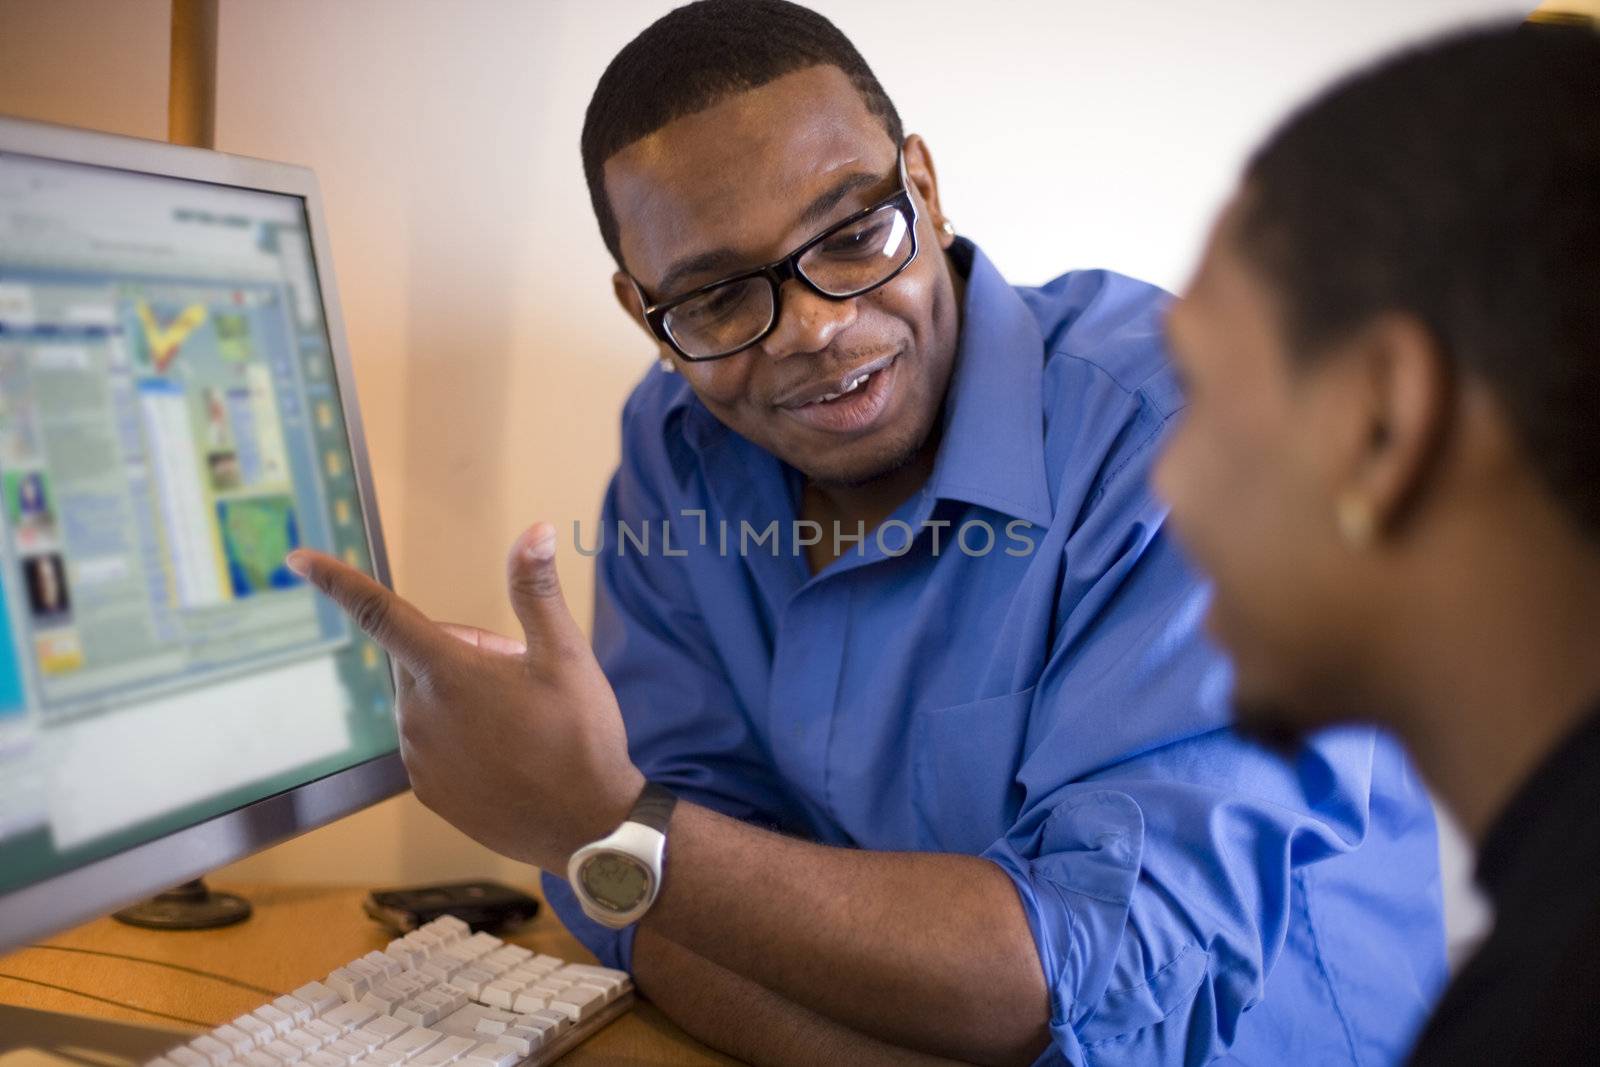 Instructor discussing work at a computer monitor